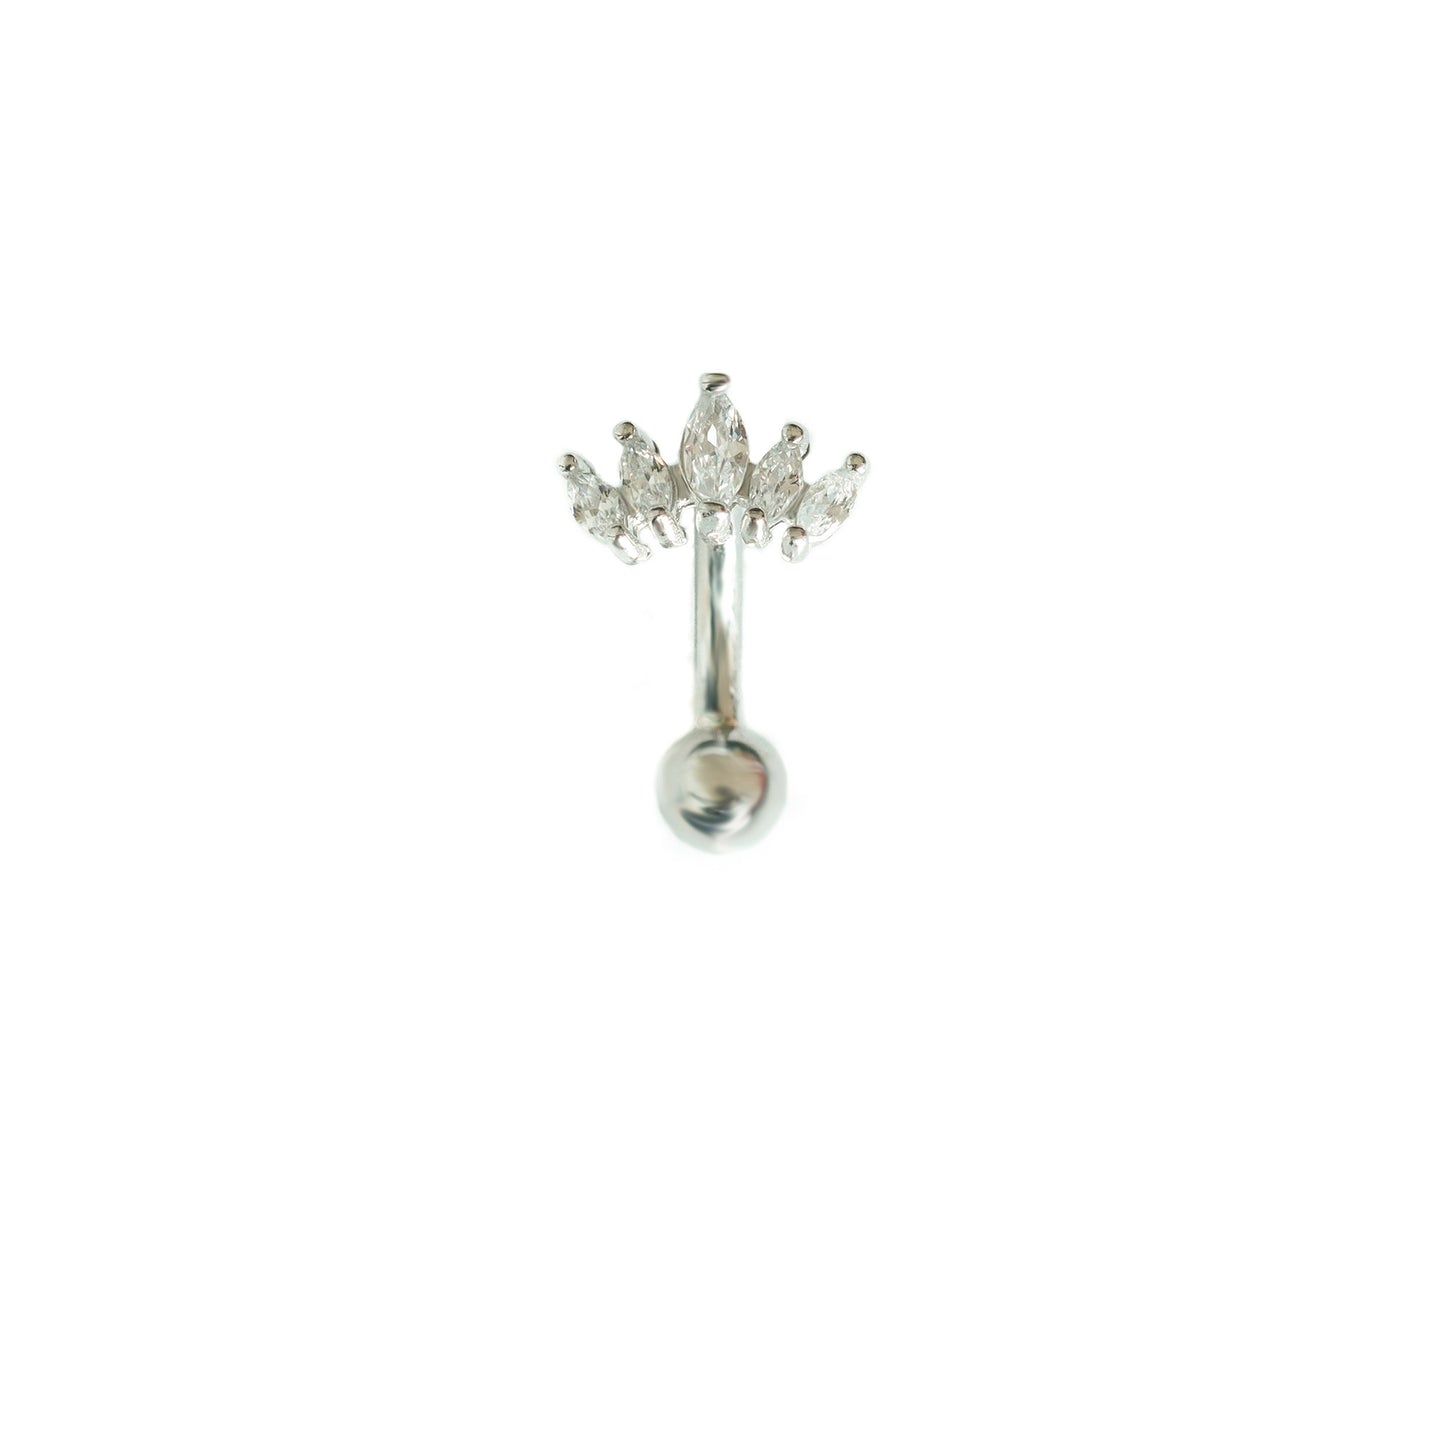 Solid 925 Silver | 16G 14G Petite Tiara Reverse Belly Ring | 6mm 1/4" 8mm 5/16" 10mm 3/8" - Sturdy South